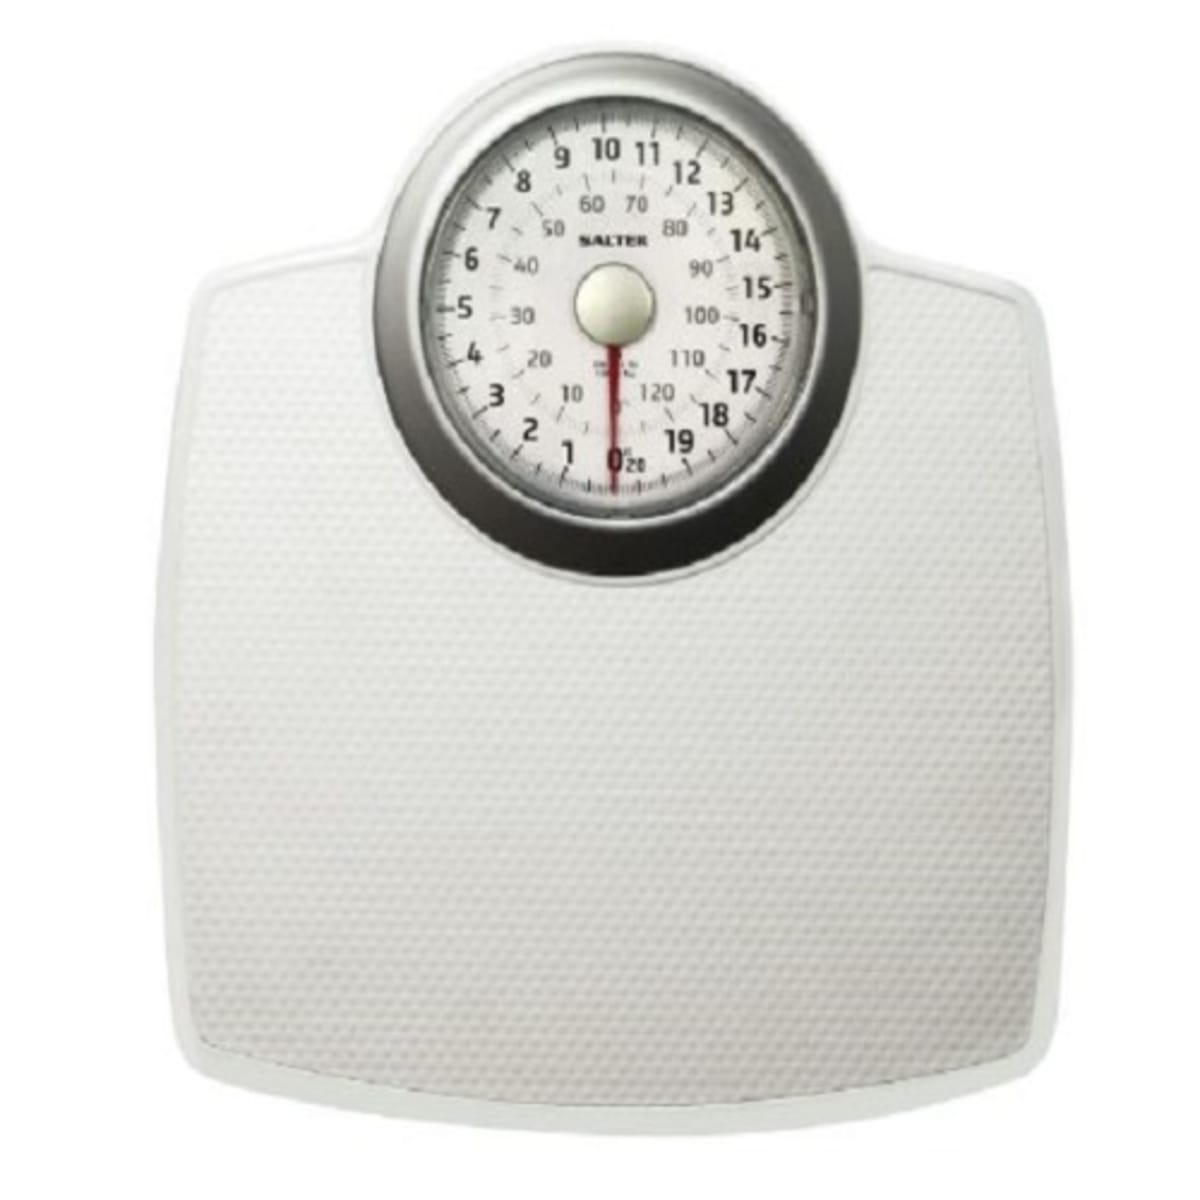 Salter Mechanical Bathroom Scale – Large Body Weight Scale - 130